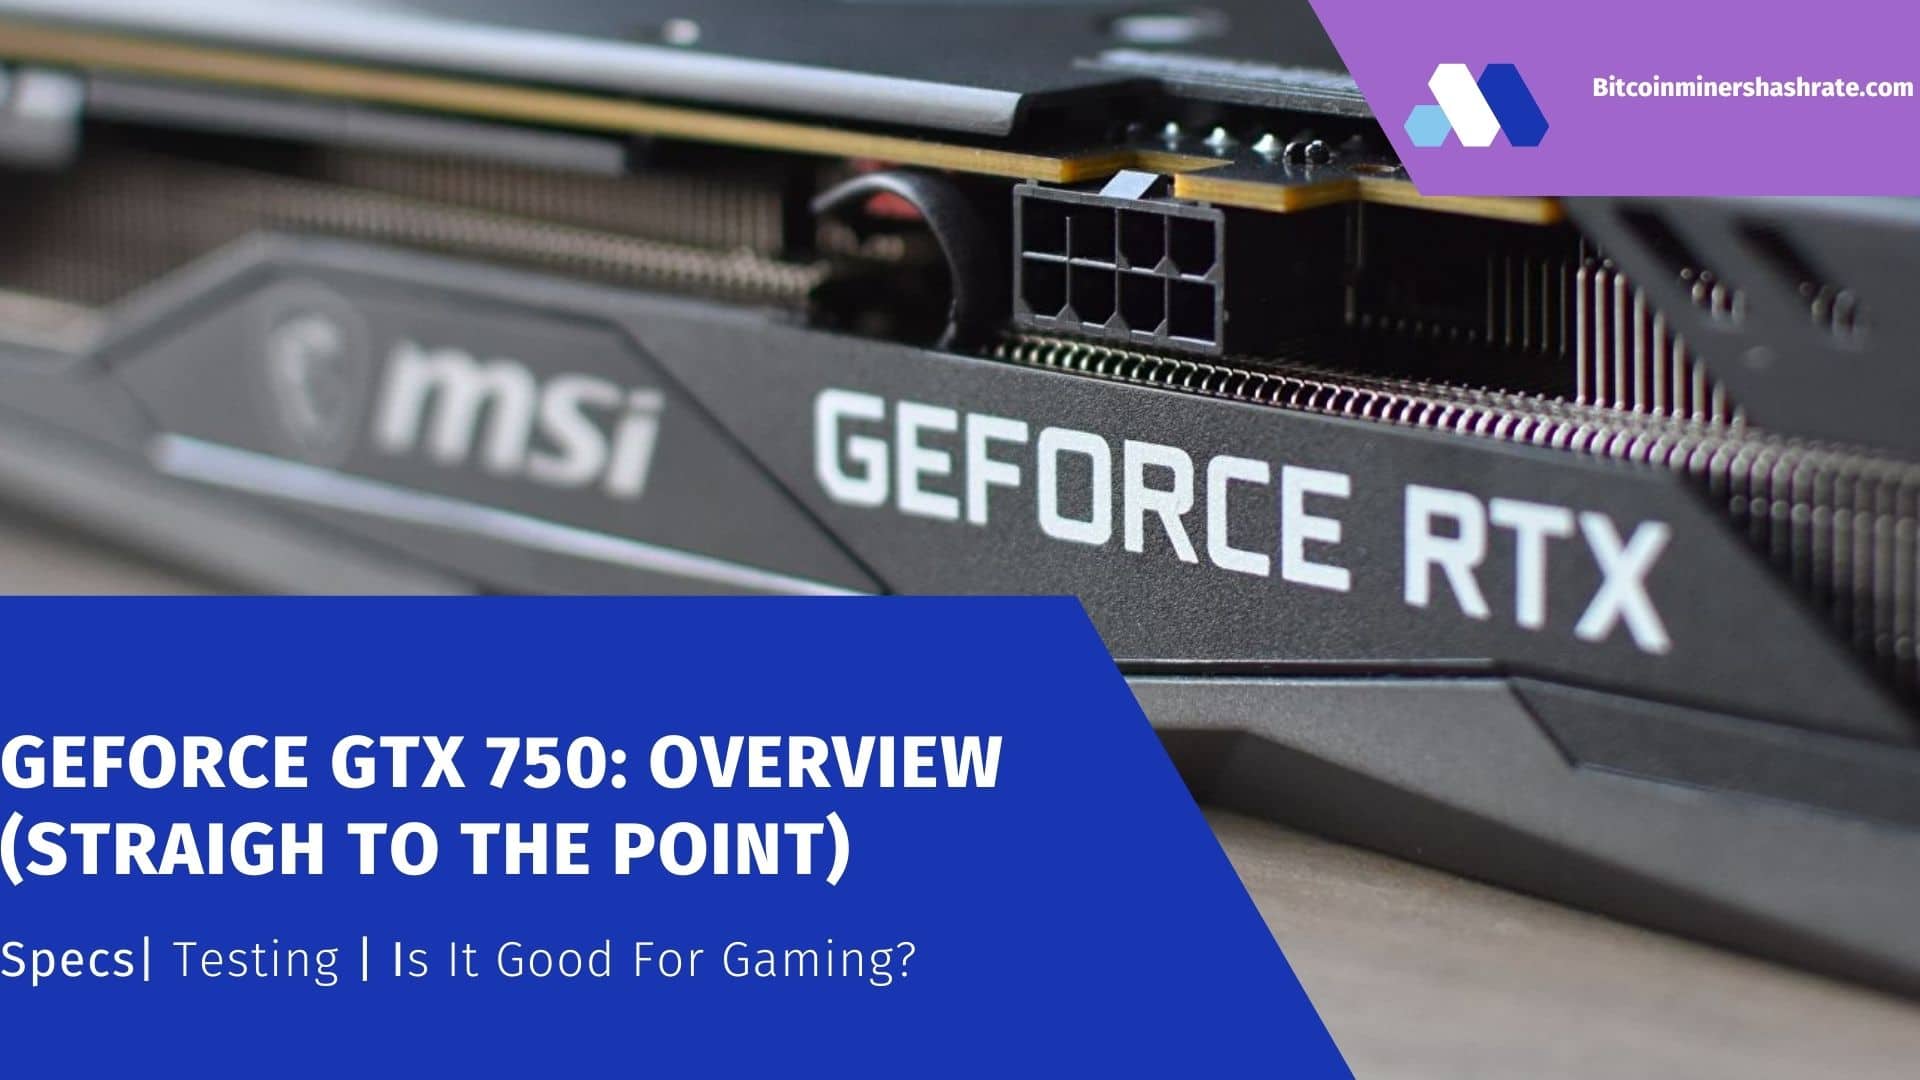 GeForce GTX 760: Overview | Specs | Speed Up to 2100 rpm | Testing - Is it Good for Gaming?